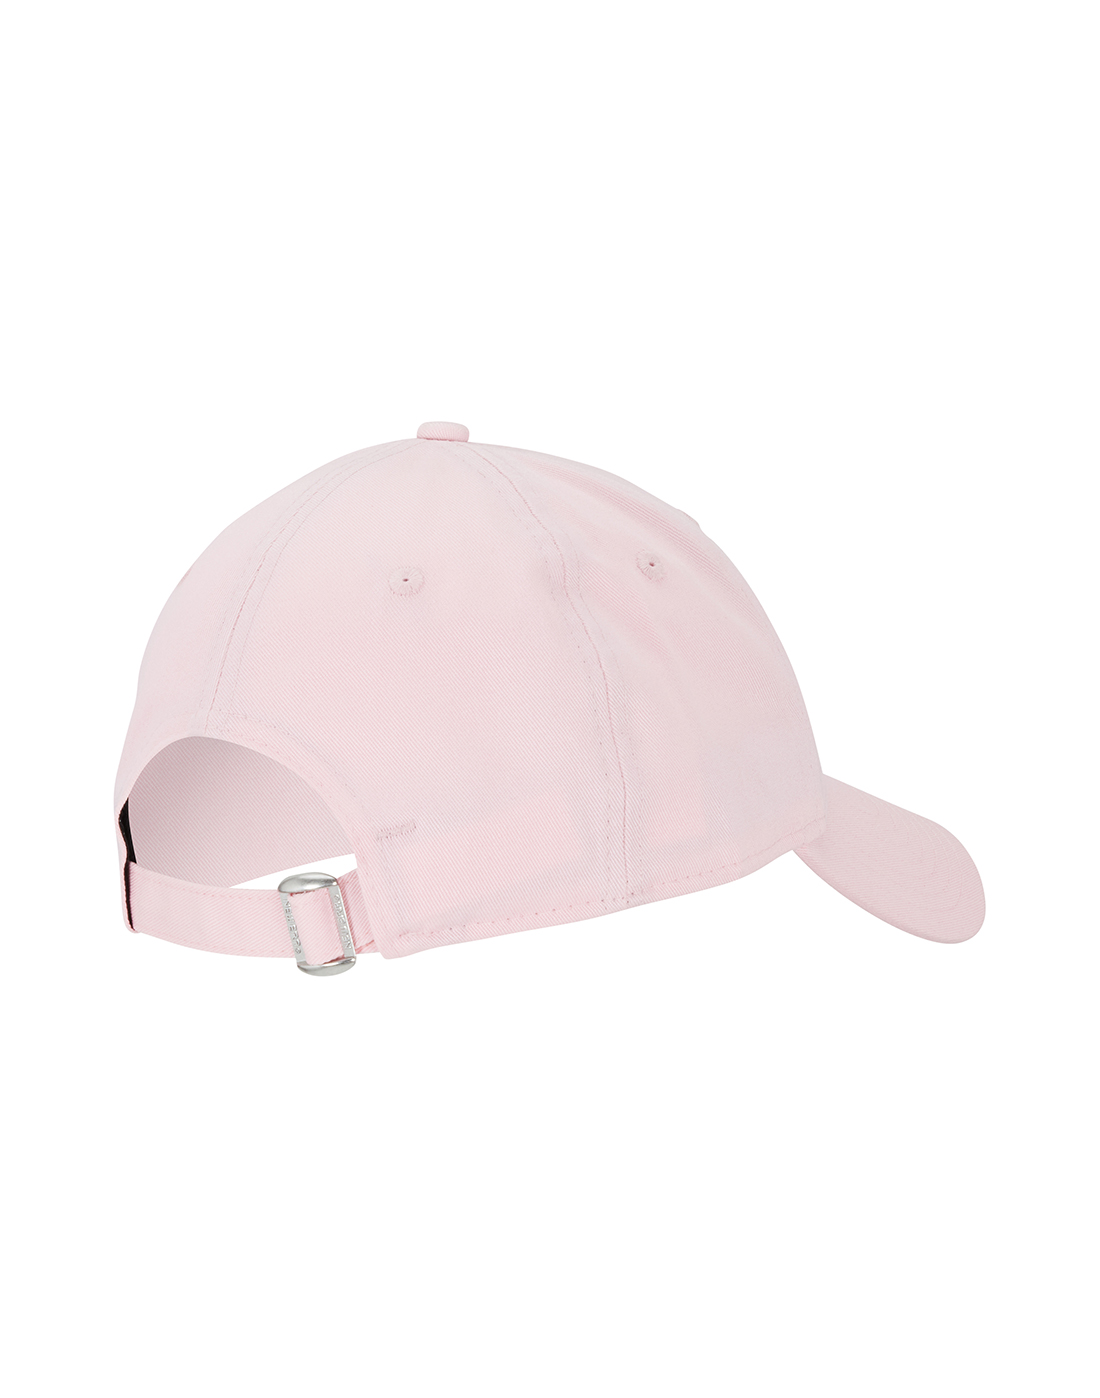 New Era Womens 9 Forty Cap - Pink | Life Style Sports IE